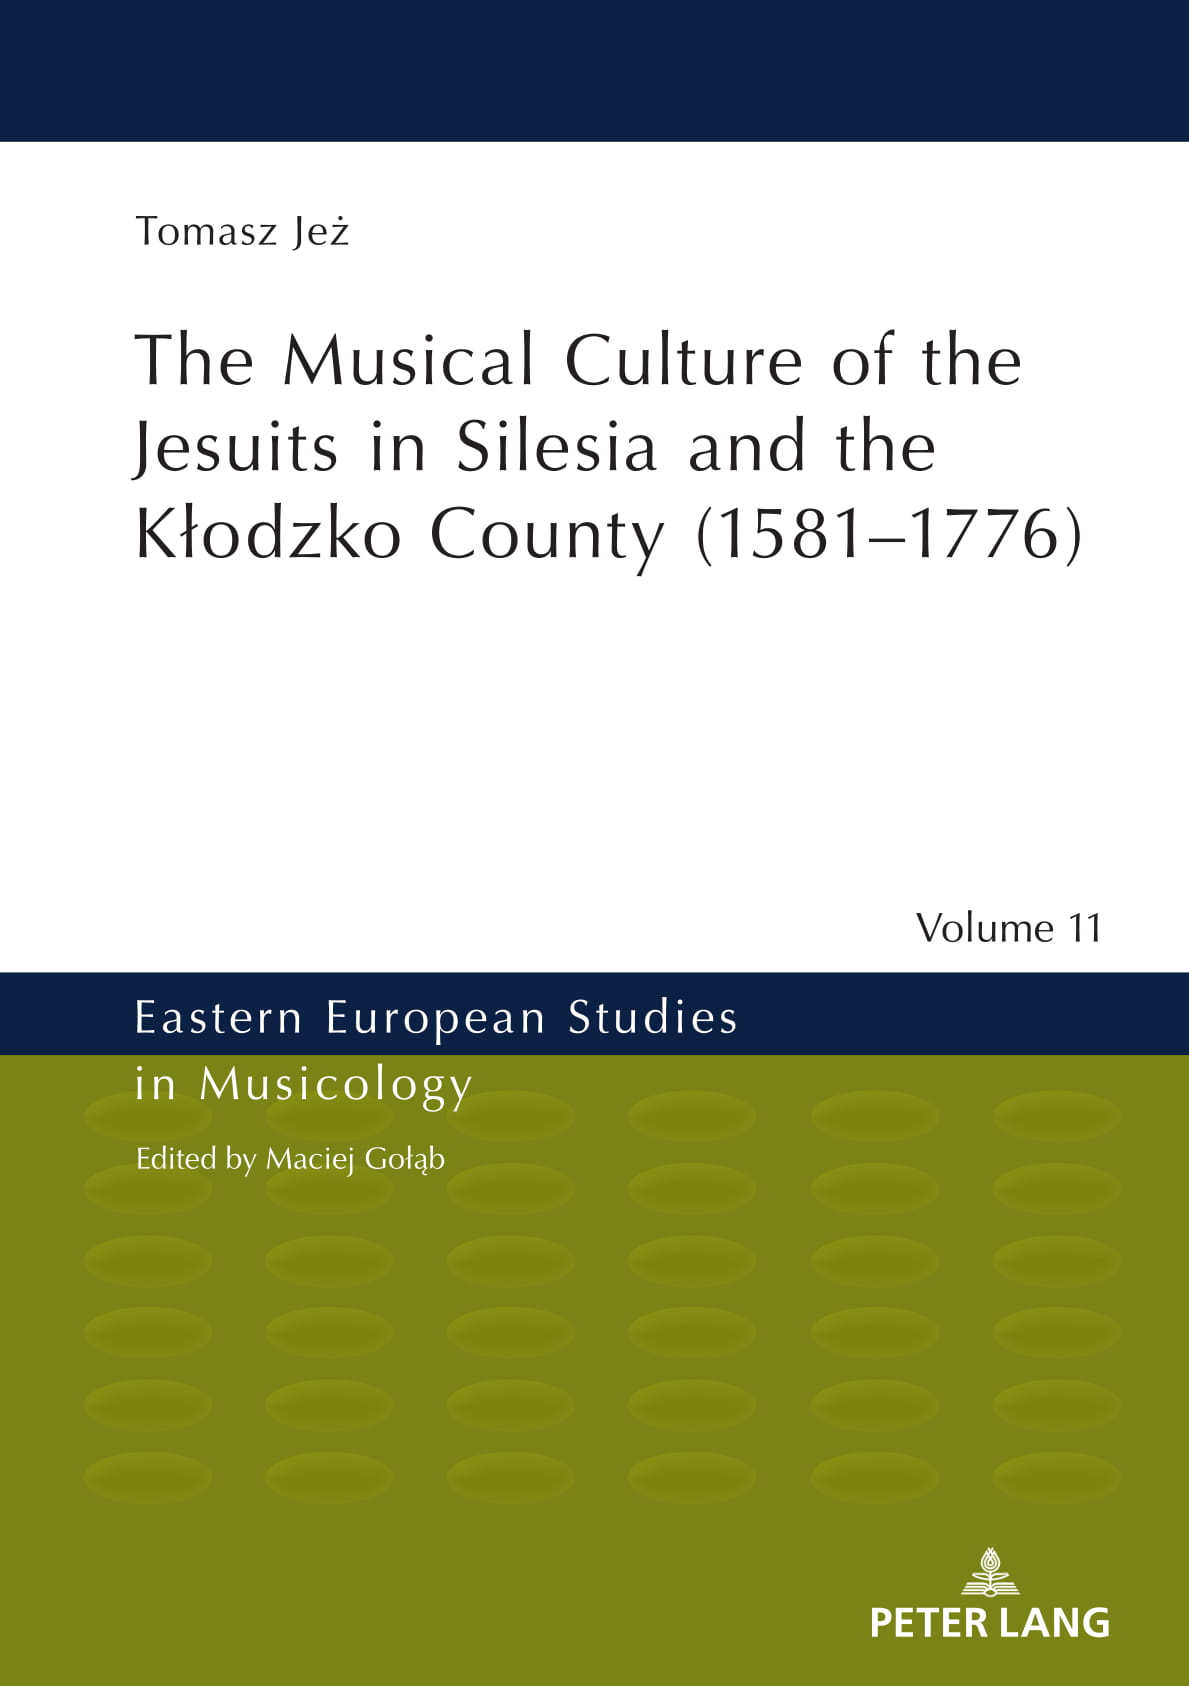 Tomasz Jeż: The Musical Culture of the Jesuits in Silesia and the Kłodzko County (1581–1776), Peter Lang 2019